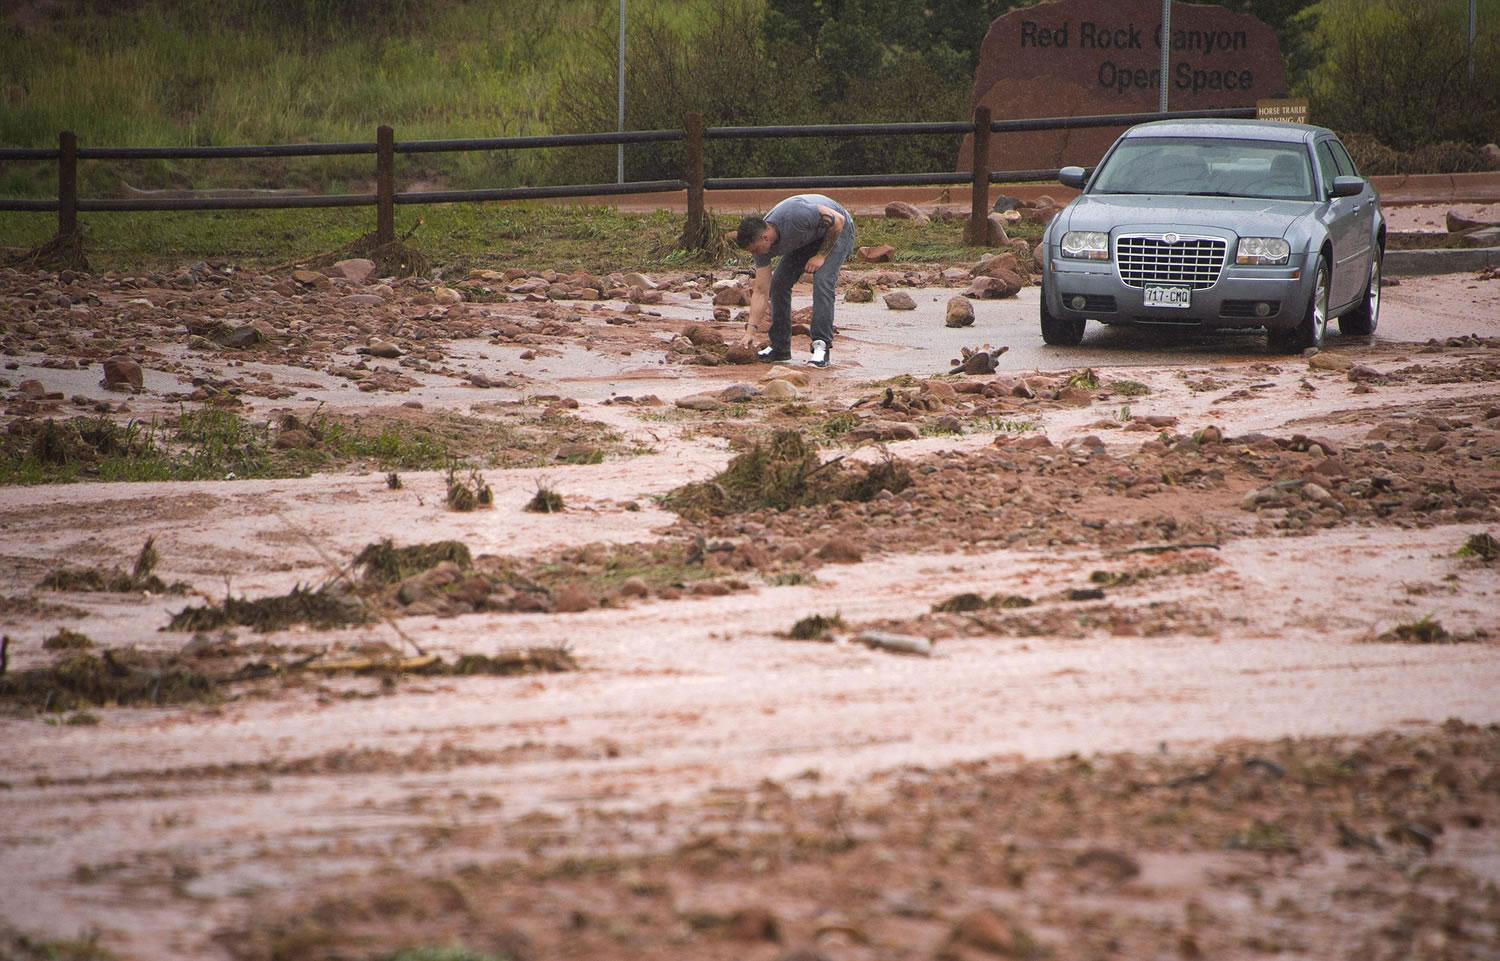 A motorist clears rocks from his path before driving his car down the flooded entrance road to Red Rock Canyon Open Space in Colorado Springs, Colo., on Tuesday morning.